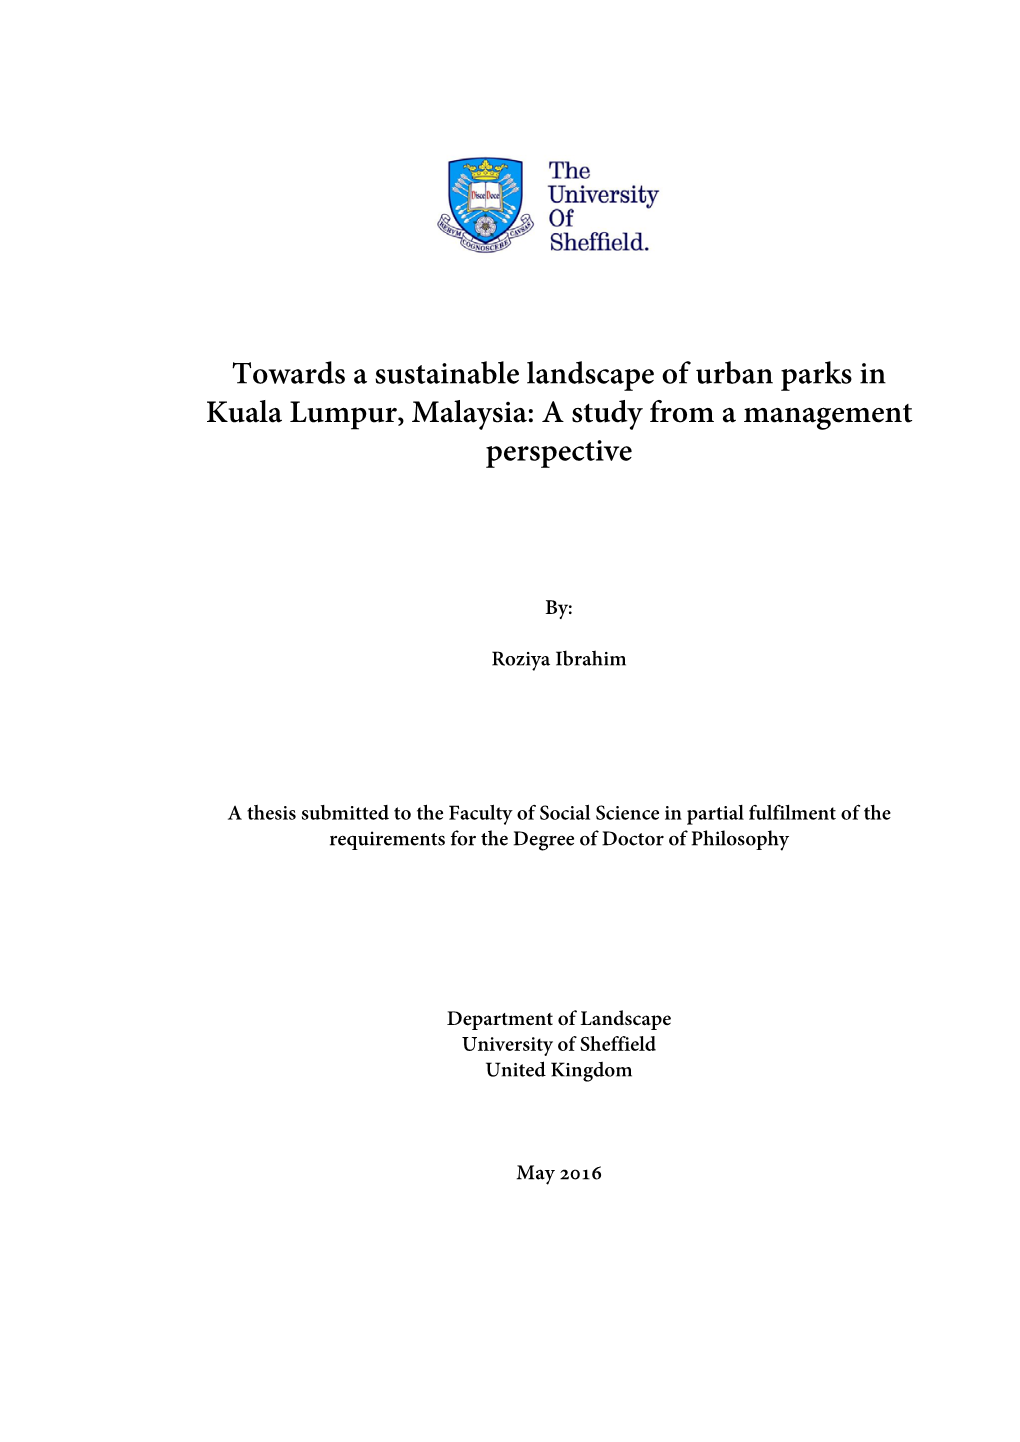 Towards a Sustainable Landscape of Urban Parks in Kuala Lumpur, Malaysia: a Study from a Management Perspective